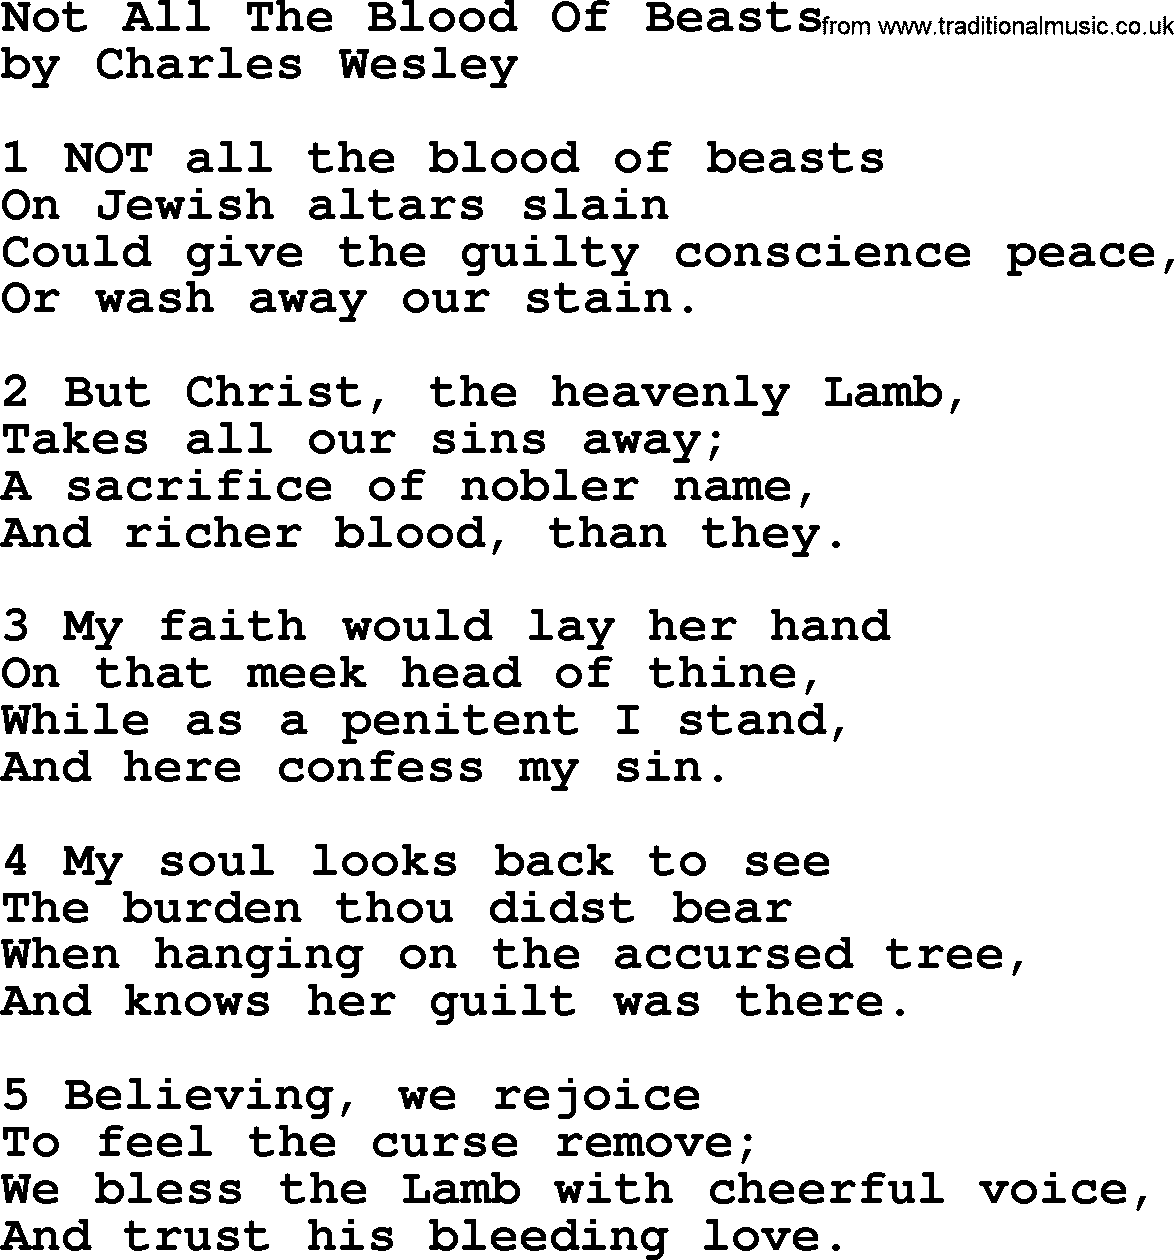 Charles Wesley hymn: Not All The Blood Of Beasts, lyrics